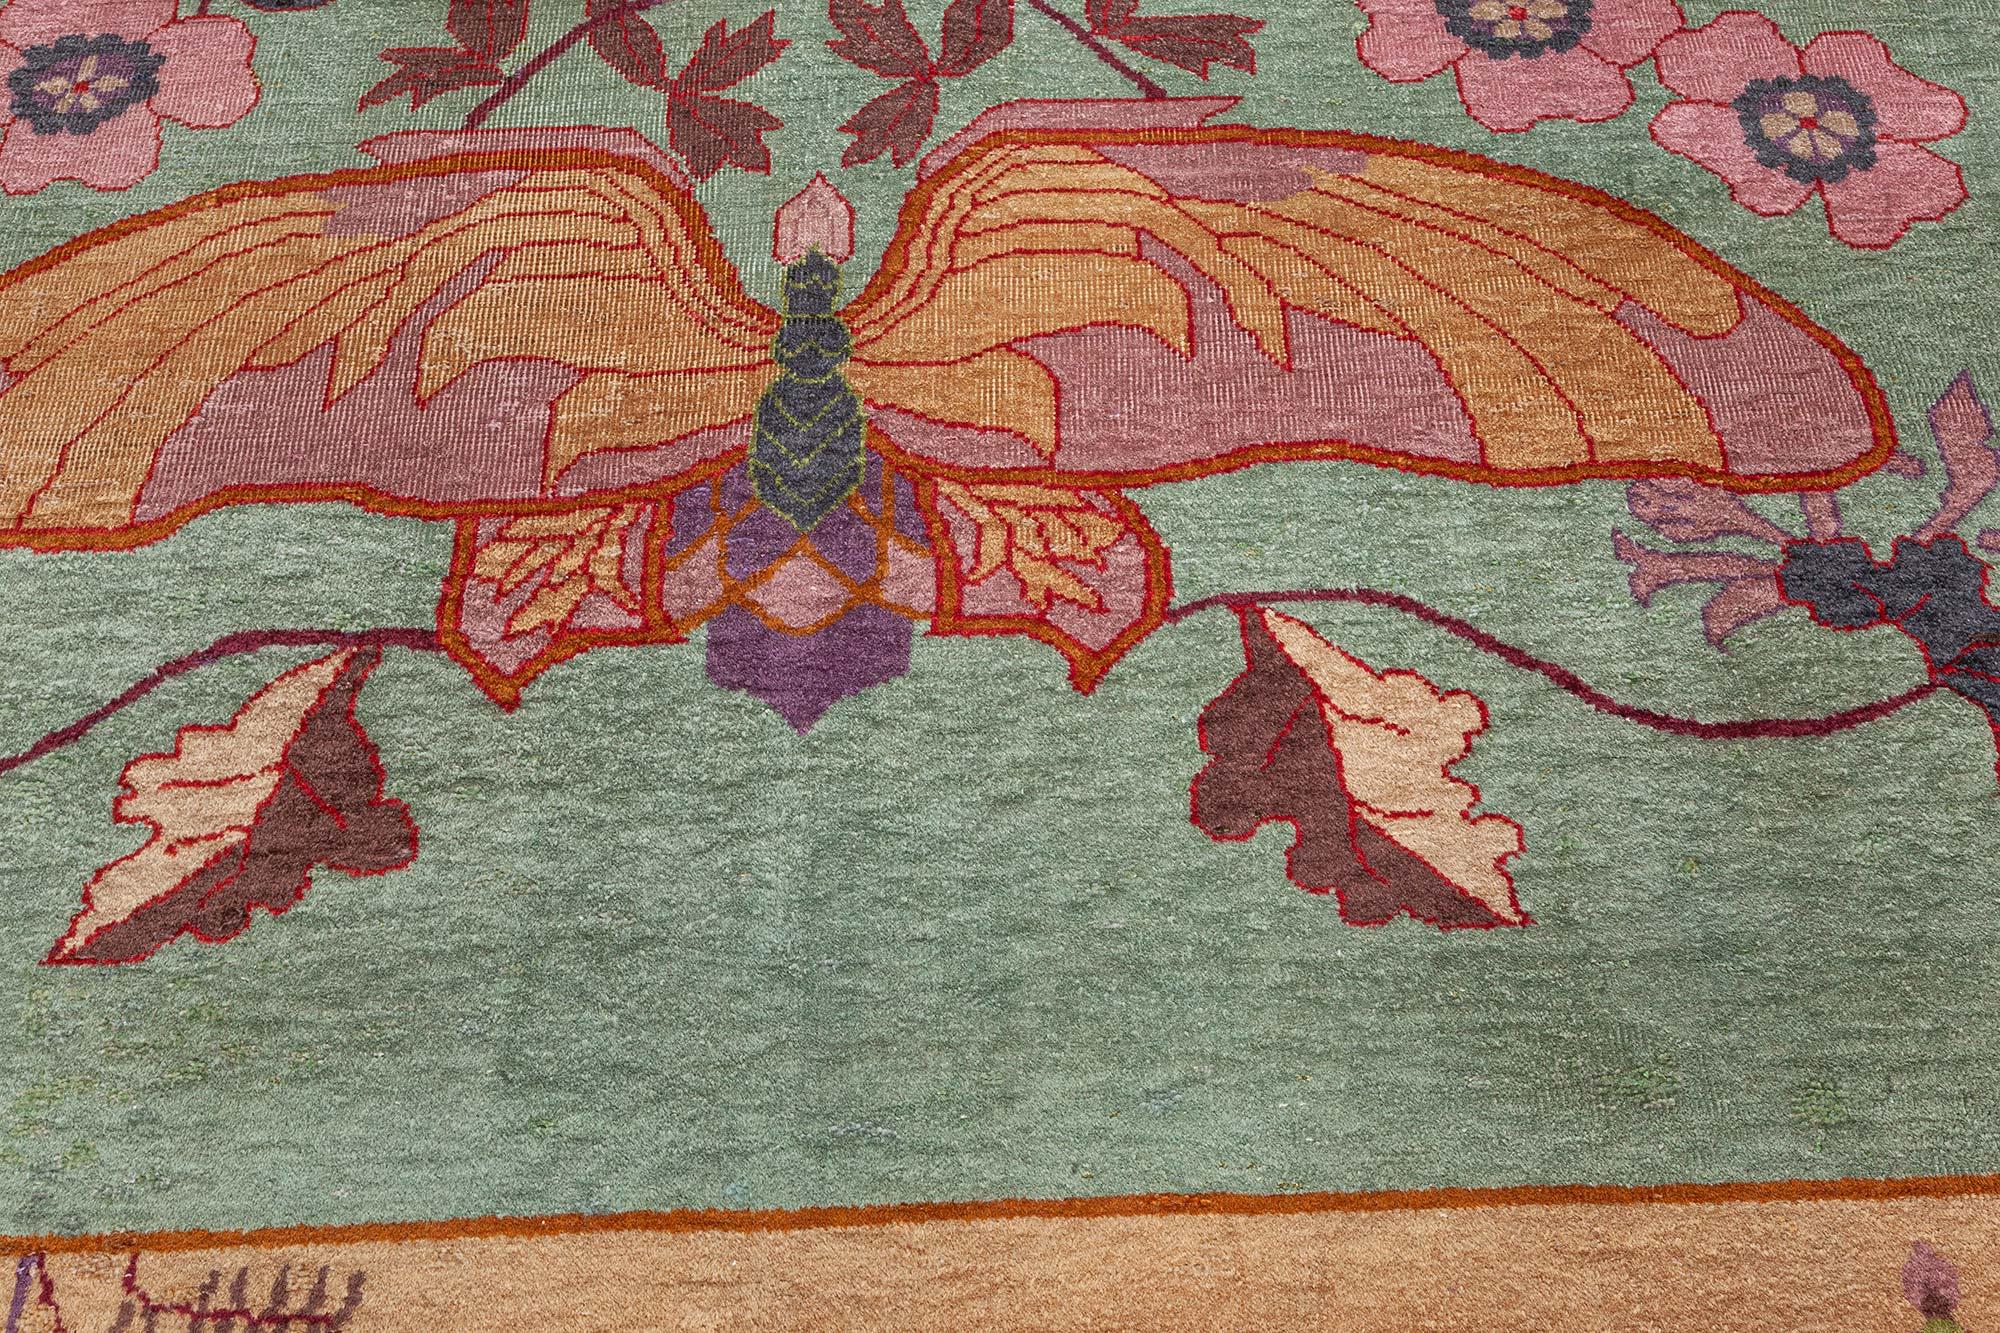 Tapis Art déco chinois
Taille : 9'10